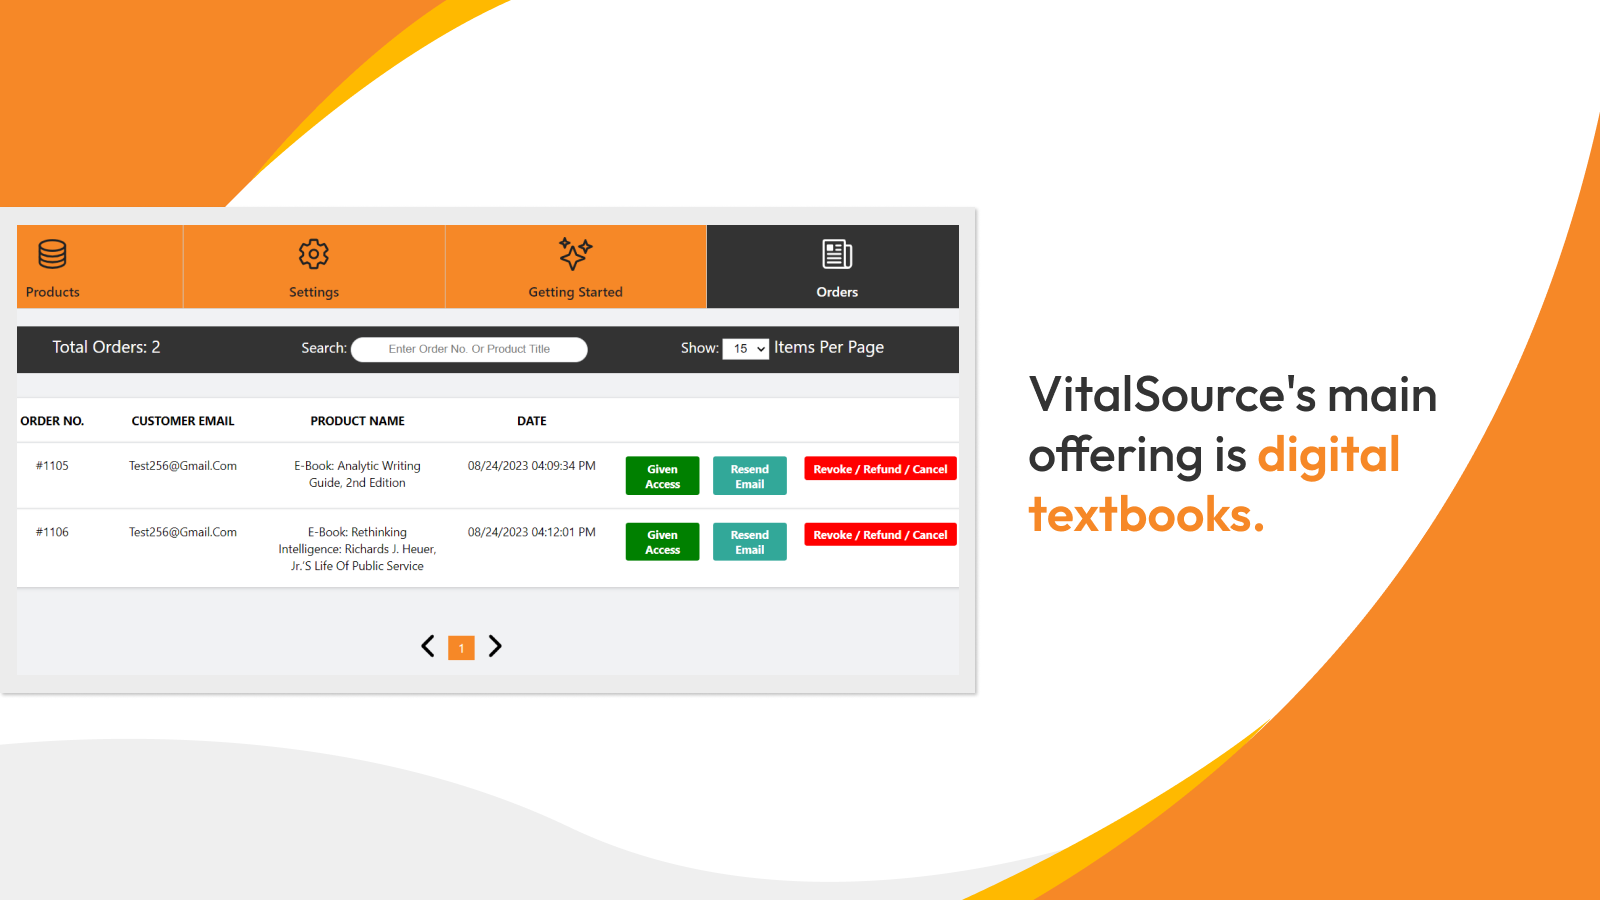 All Ebooks orders will appear in the admin dashboard.